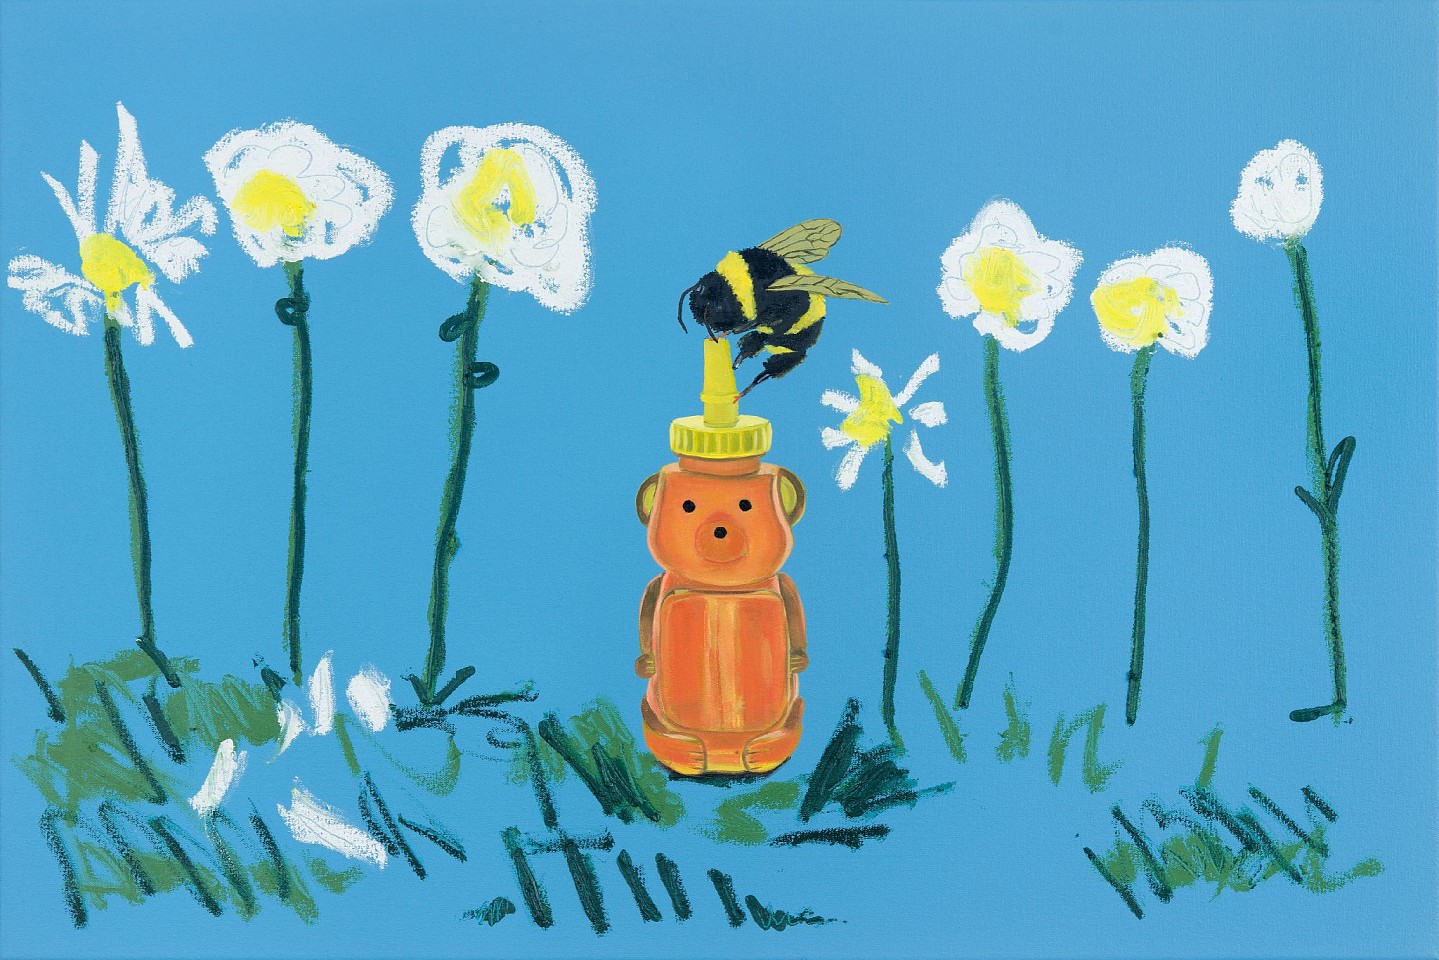 Adam S. Umbach, Honeybear with Mr. Bee, 2023
oil, enamel, and oil stick on canvas, 24 x 36 in. (61 x 91.4 cm)
AU231103